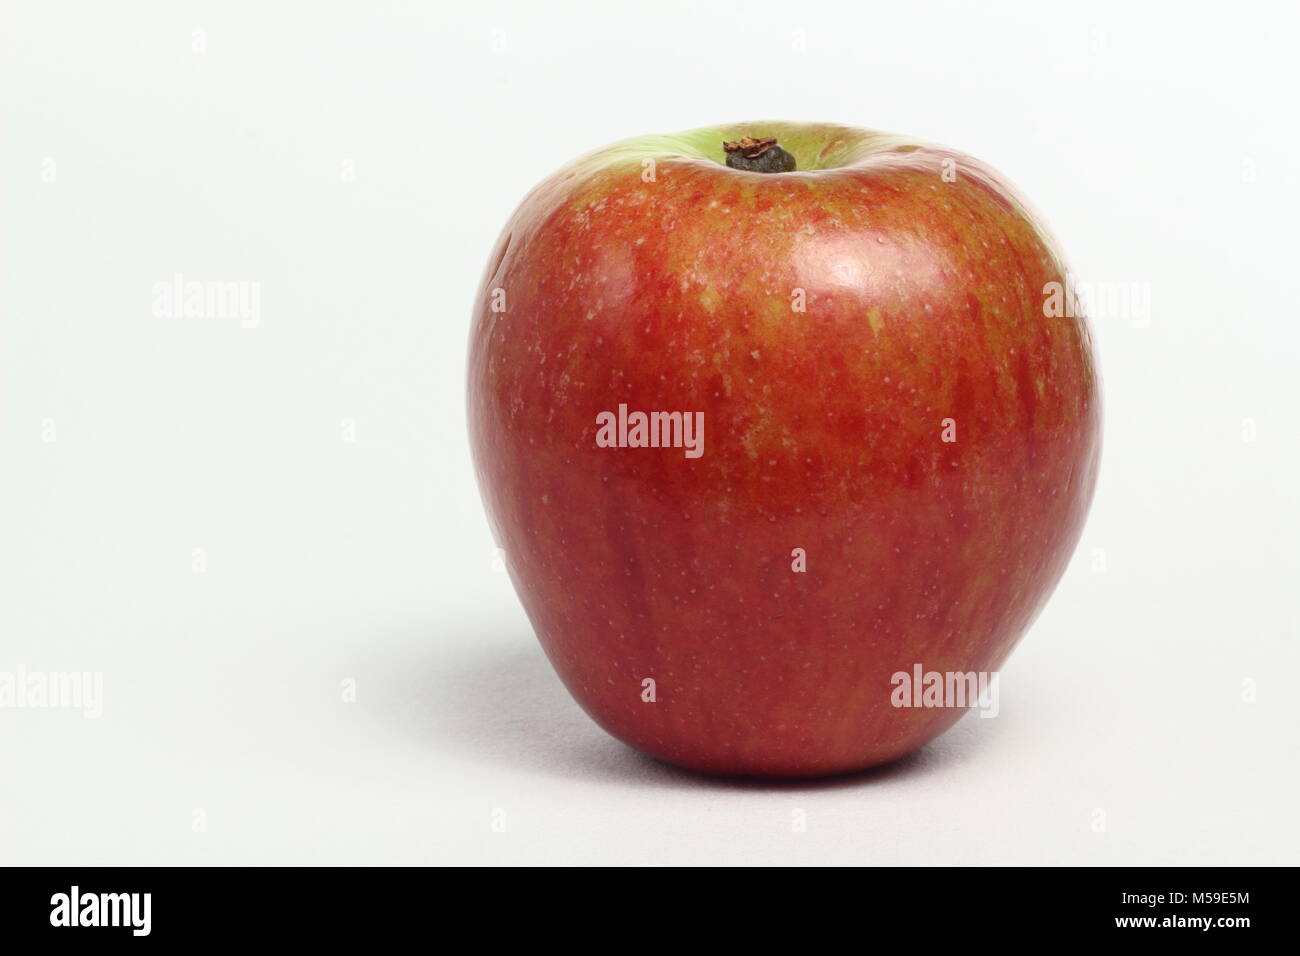 Malus domestica 'Cox's Orange Pippin', or simply 'Cox', an English apple variety, white background, UK Stock Photo